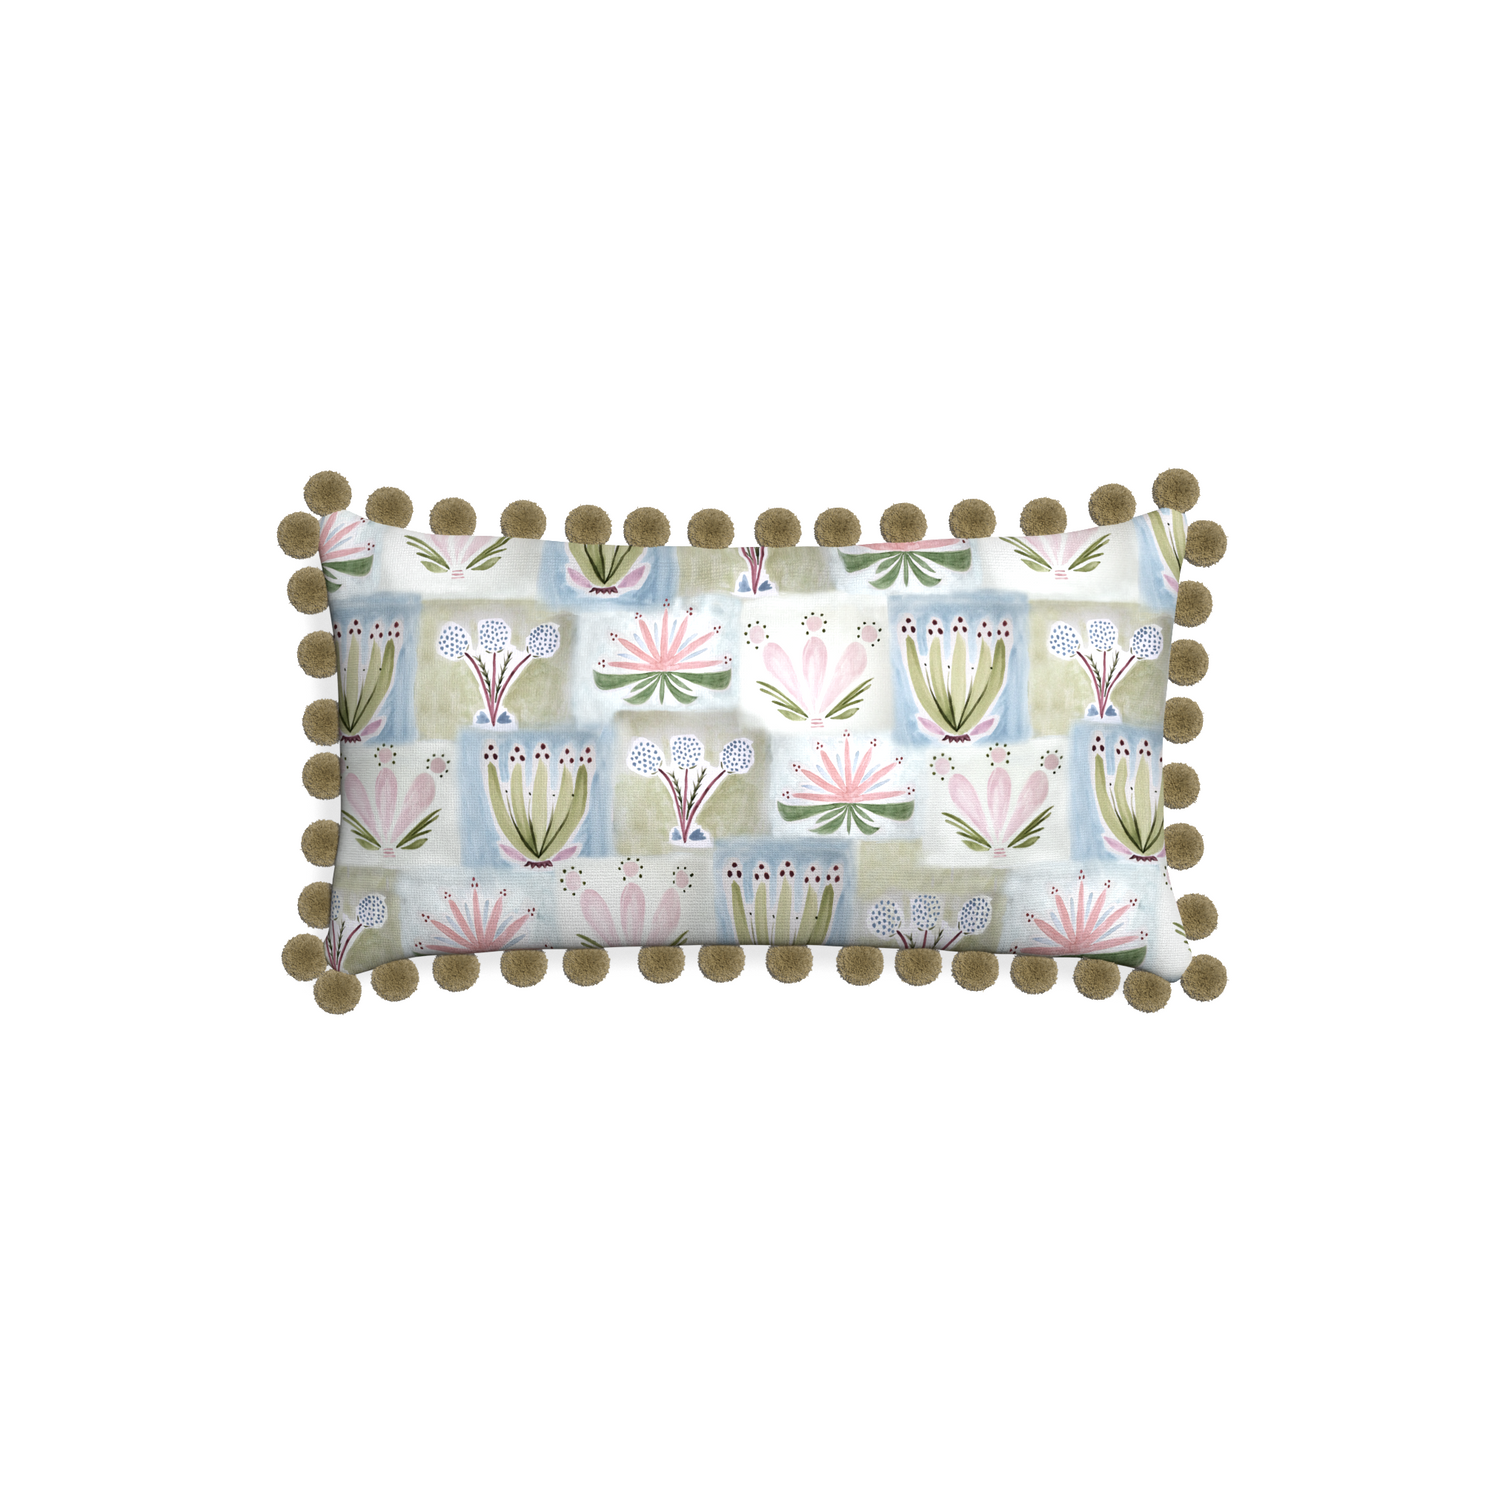 Petite-lumbar harper custom hand-painted floralpillow with olive pom pom on white background